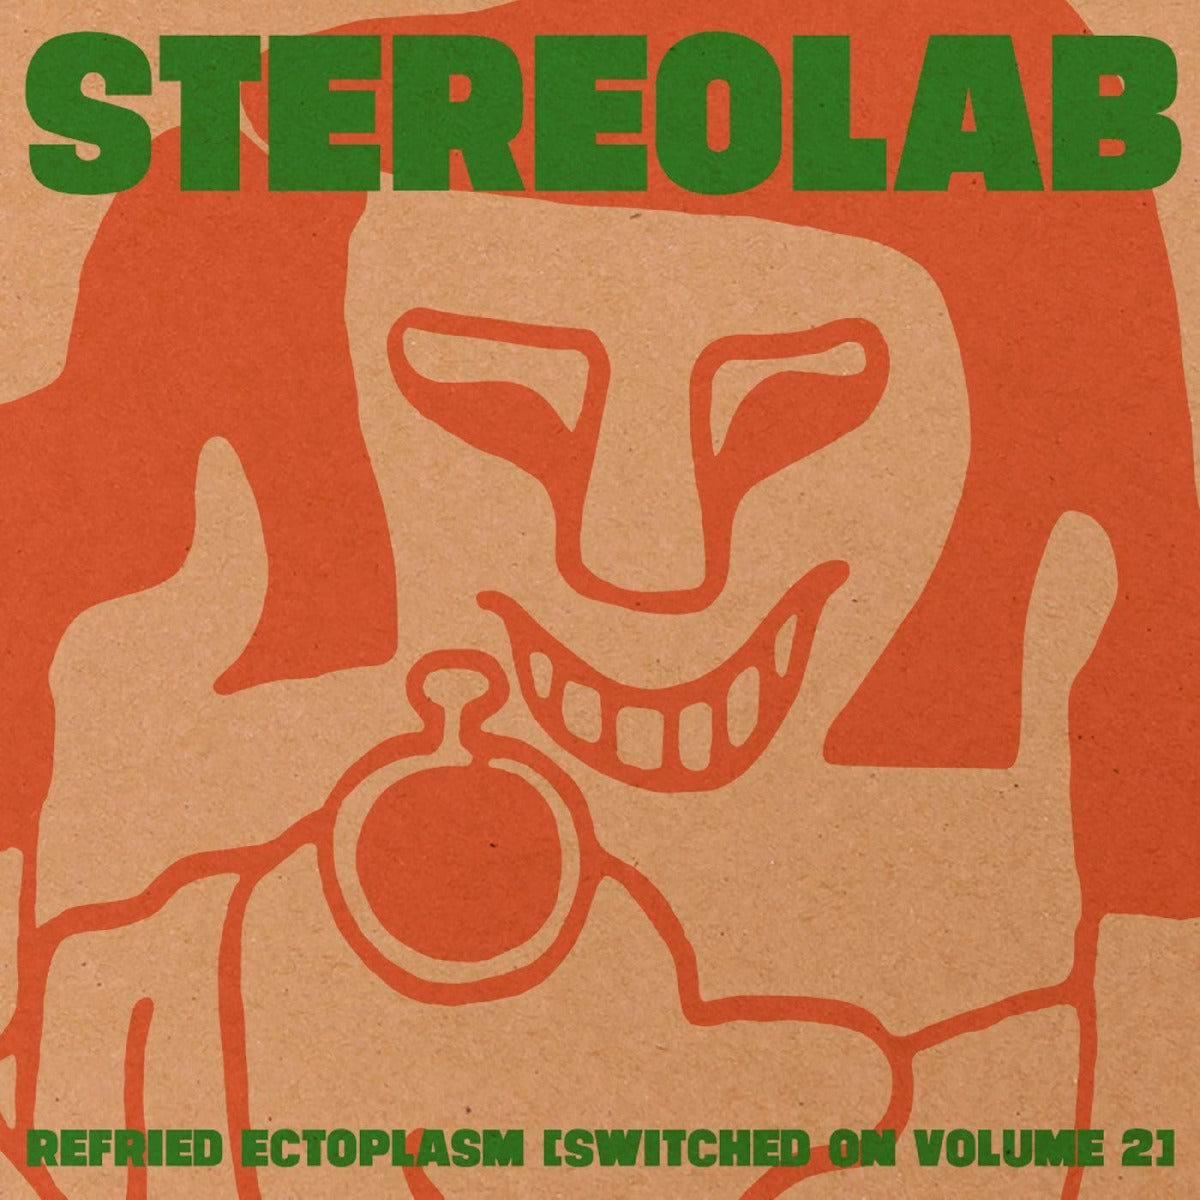 Stereolab - Refried Ectoplasm: Switched on Volume 2 [2LP] [Vinyl]